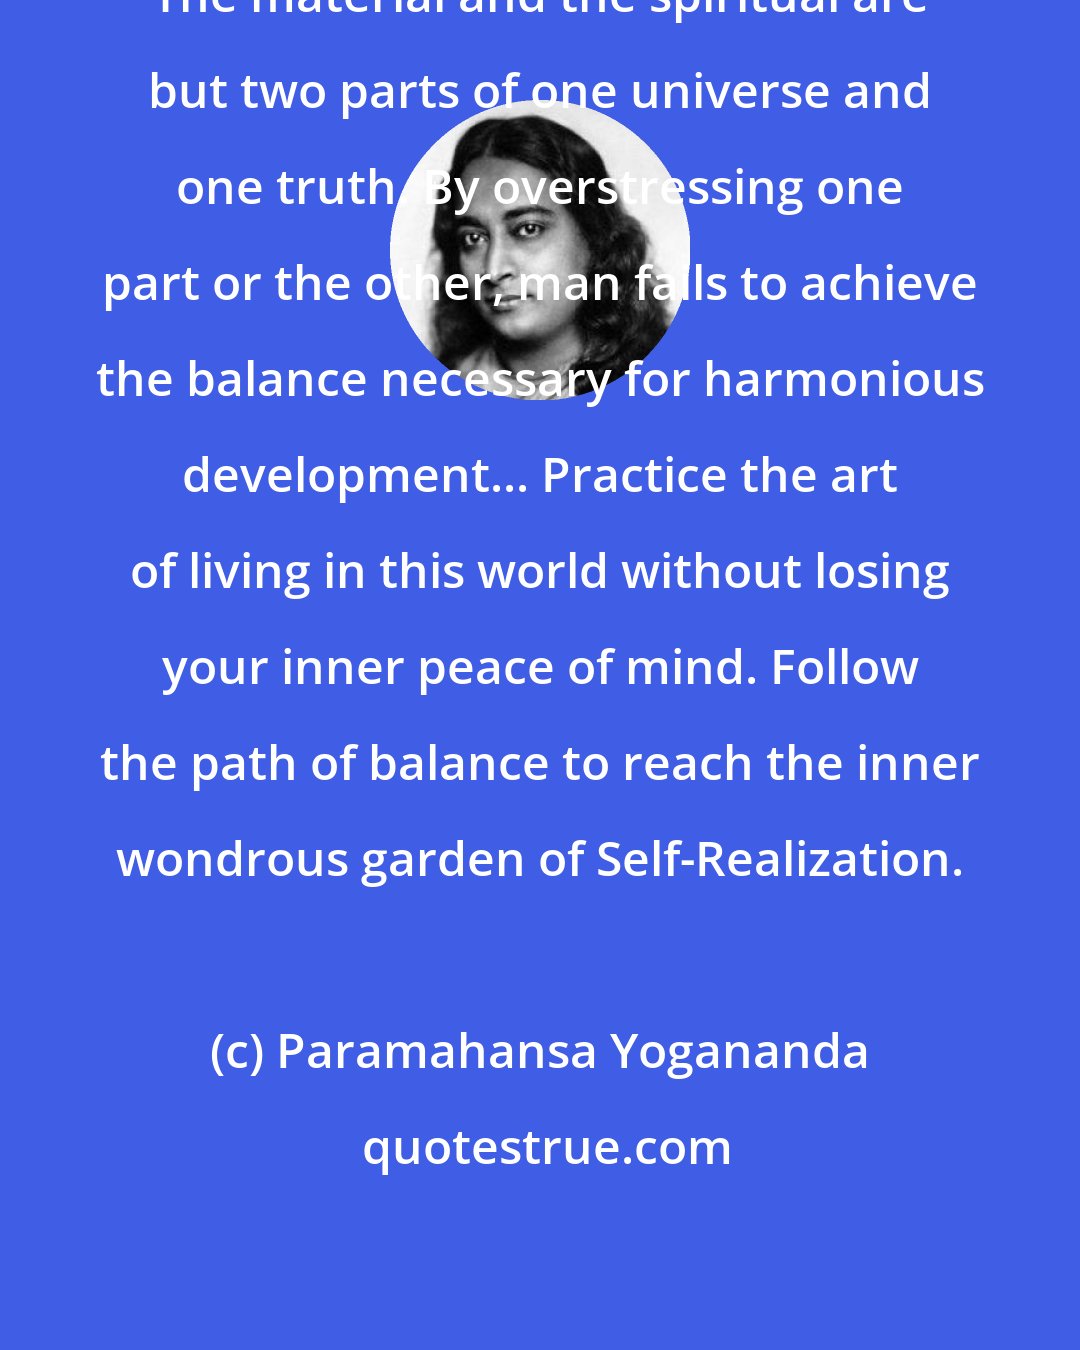 Paramahansa Yogananda: The material and the spiritual are but two parts of one universe and one truth. By overstressing one part or the other, man fails to achieve the balance necessary for harmonious development... Practice the art of living in this world without losing your inner peace of mind. Follow the path of balance to reach the inner wondrous garden of Self-Realization.